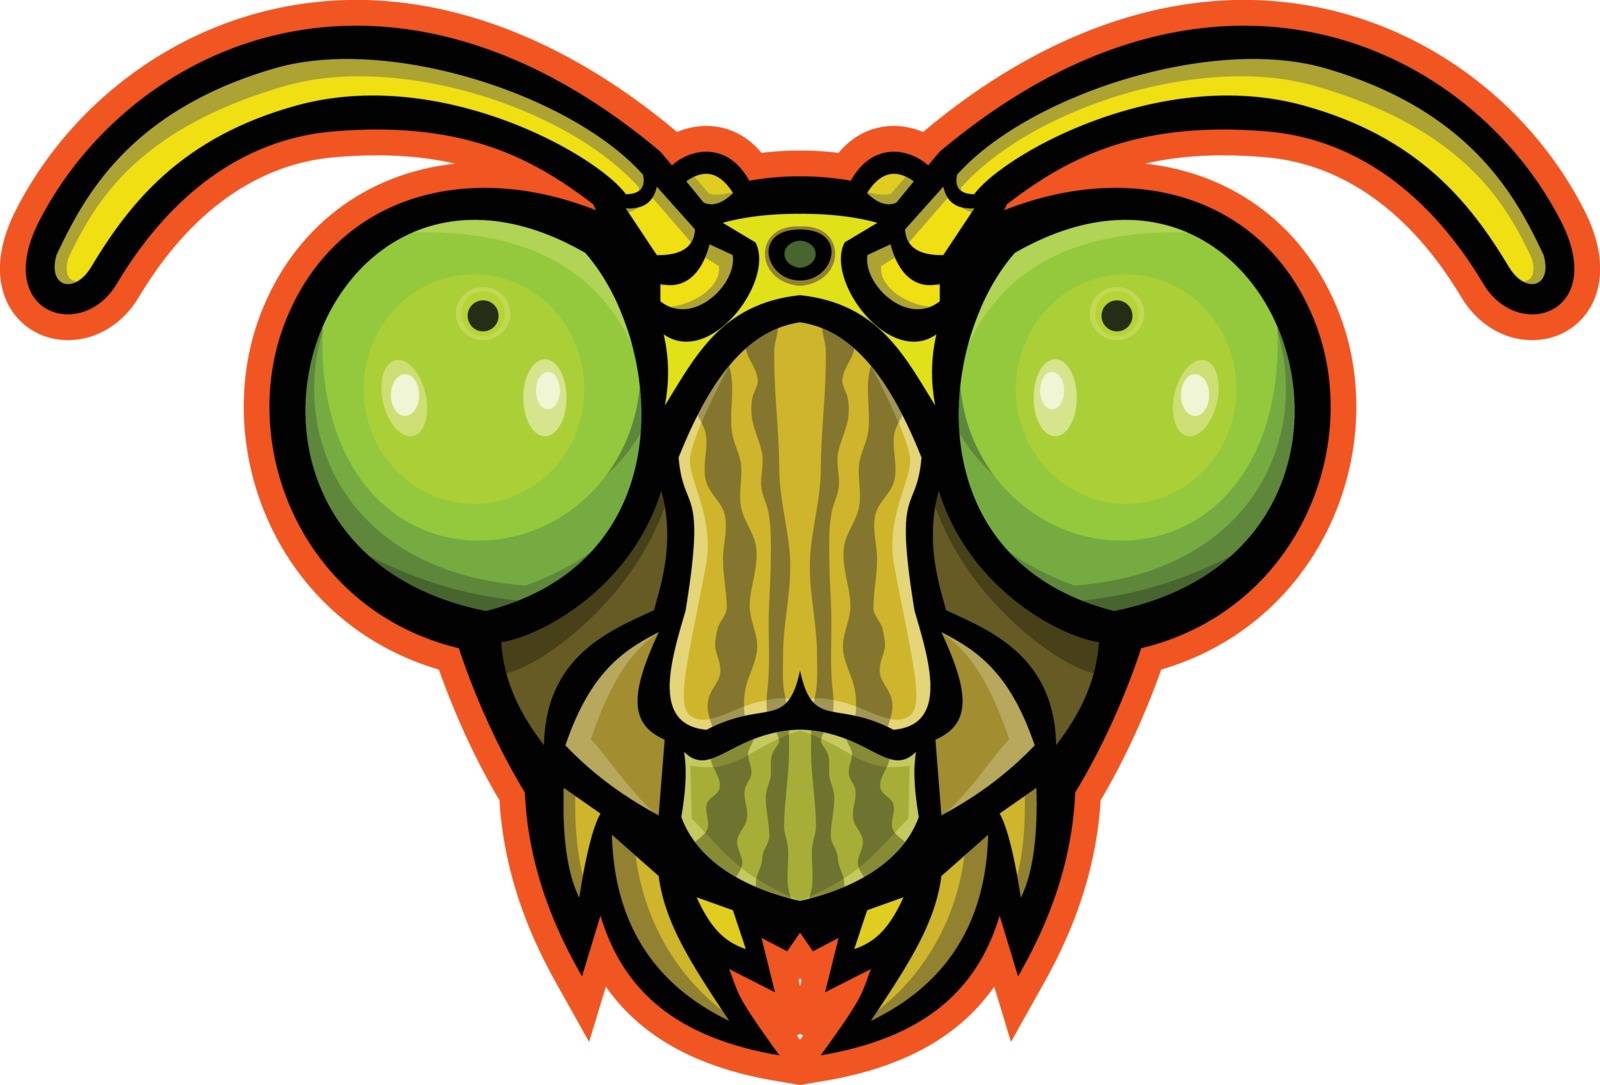 Mascot icon illustration of head of a praying mantis, an insect of the order Mantodea viewed from front on isolated background in retro style.